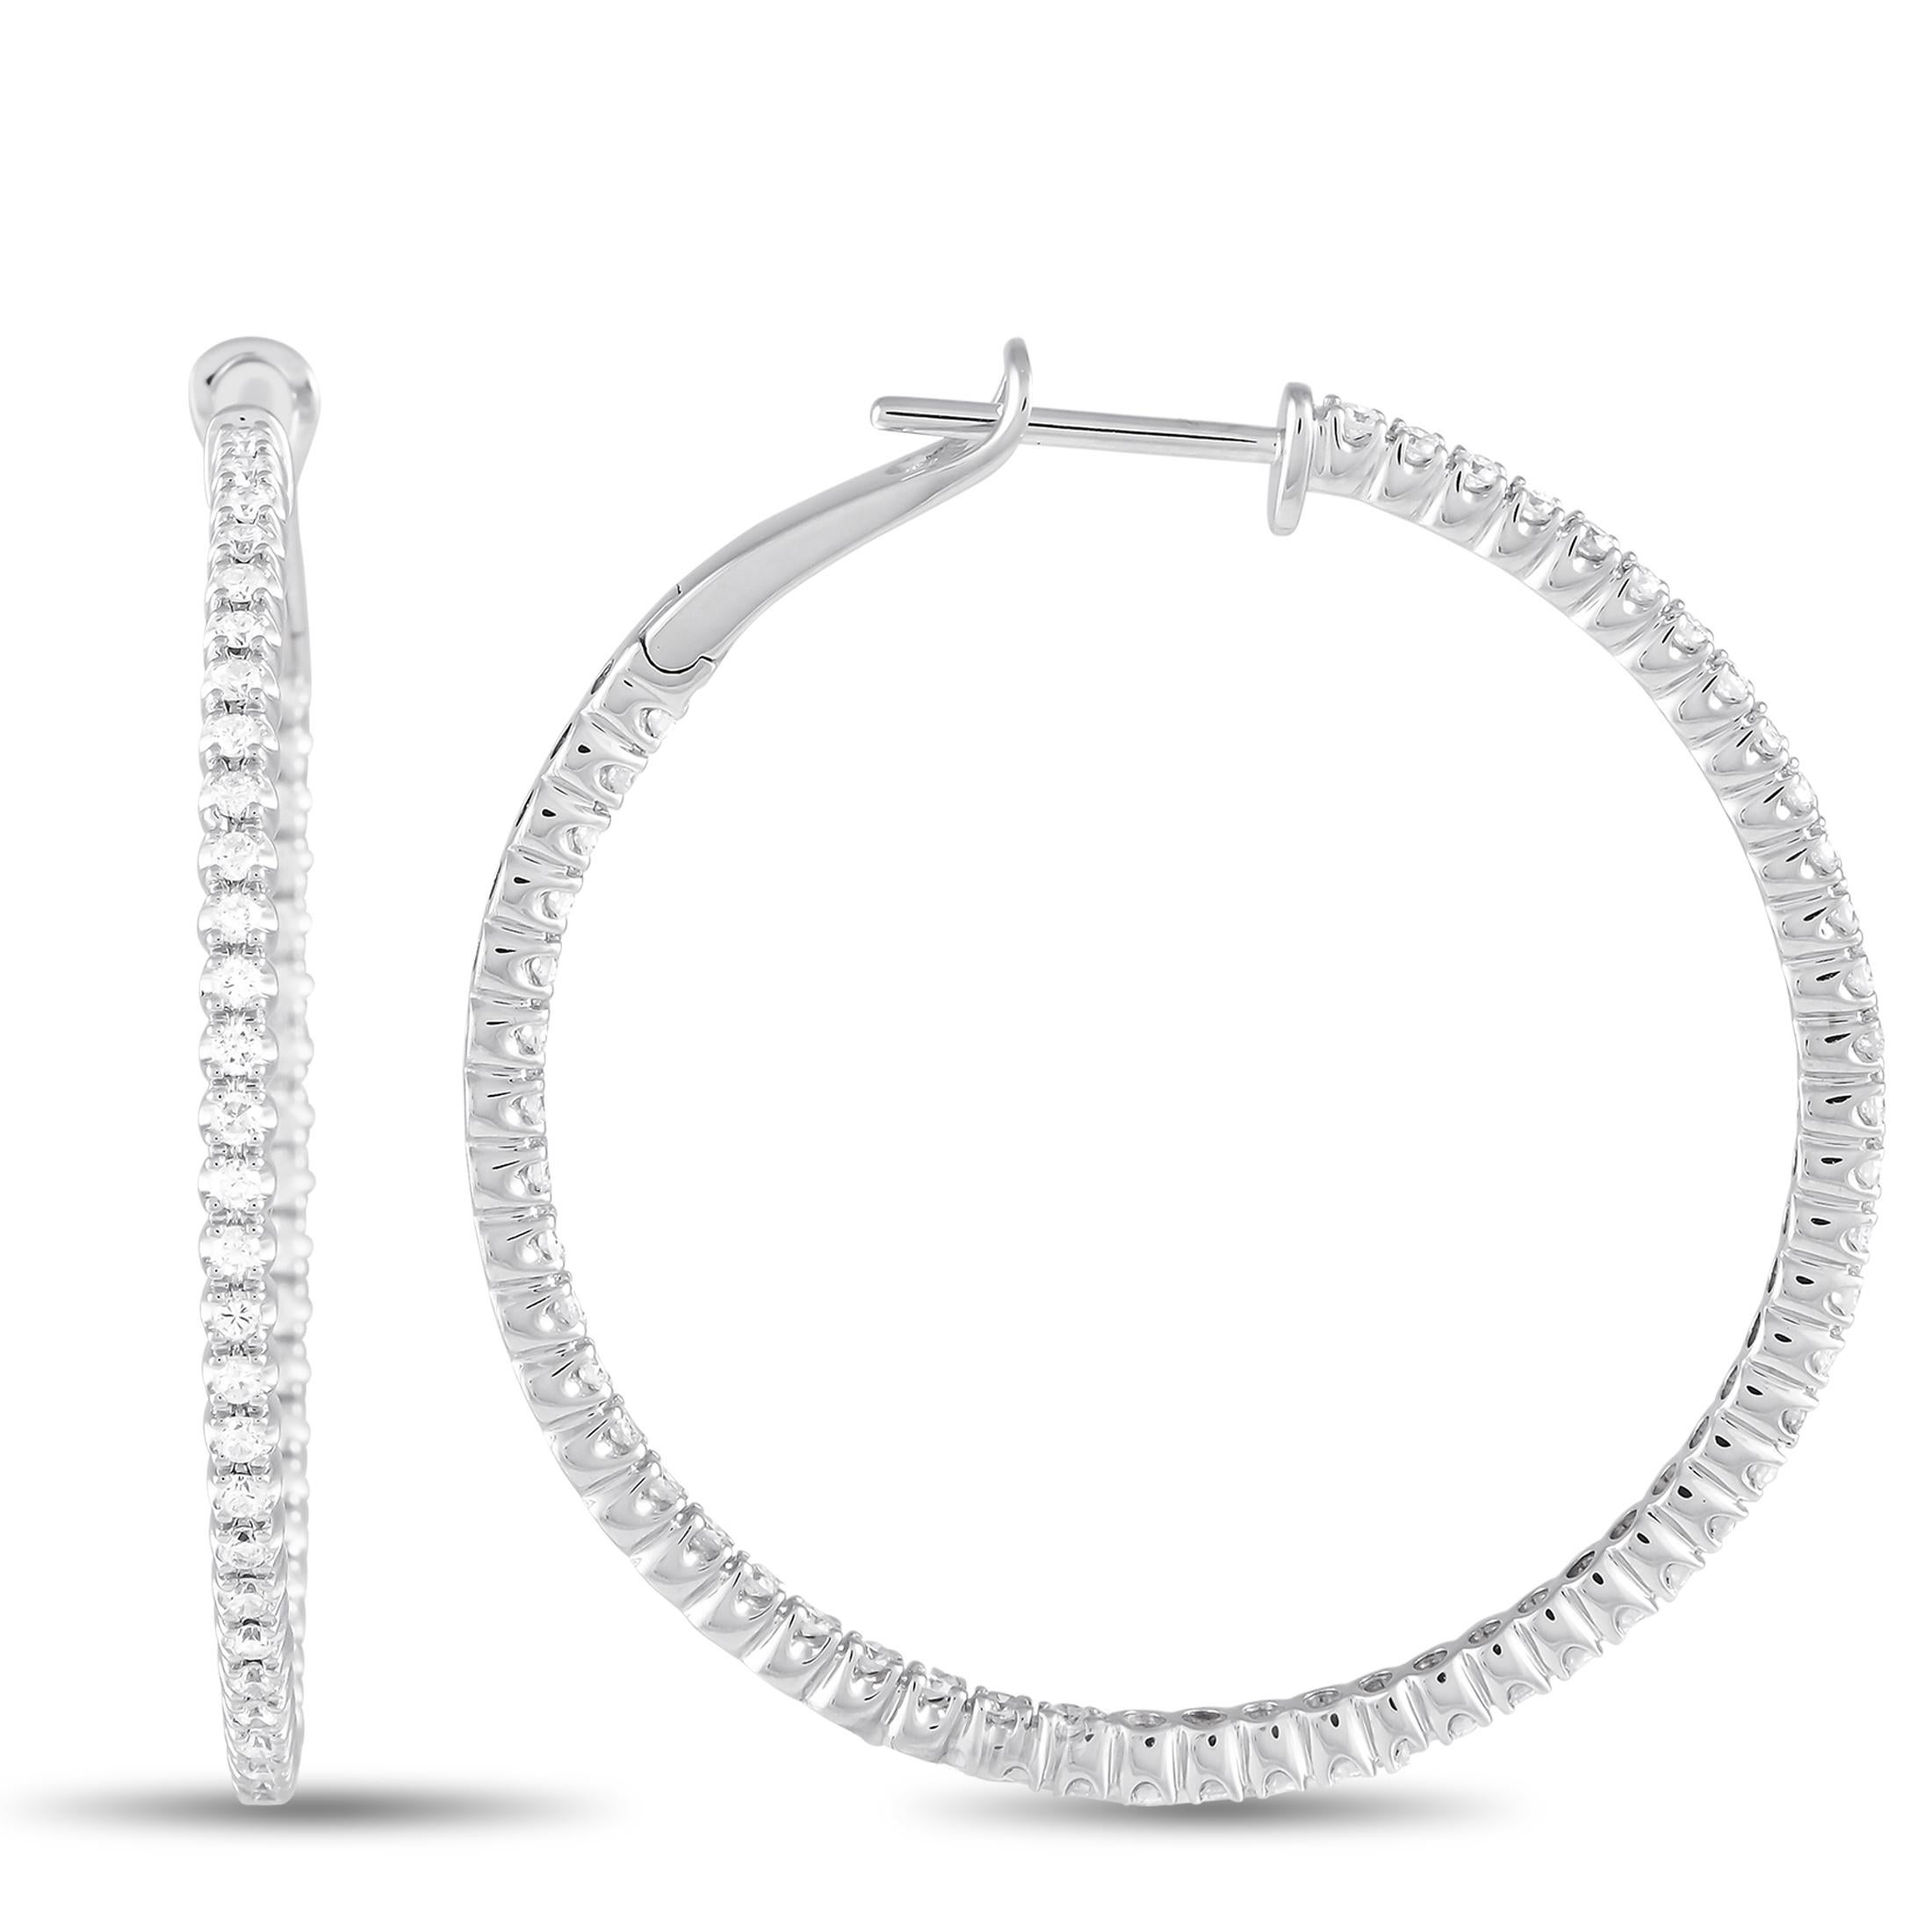 These luxurious hoop earrings will put the perfect finishing touch on any ensemble. Covered in sparkling diamonds with a total weight of 1.32 carats, each 14K White Gold setting measures 1.5\u201d round.\r\nThis jewelry piece is offered in brand new